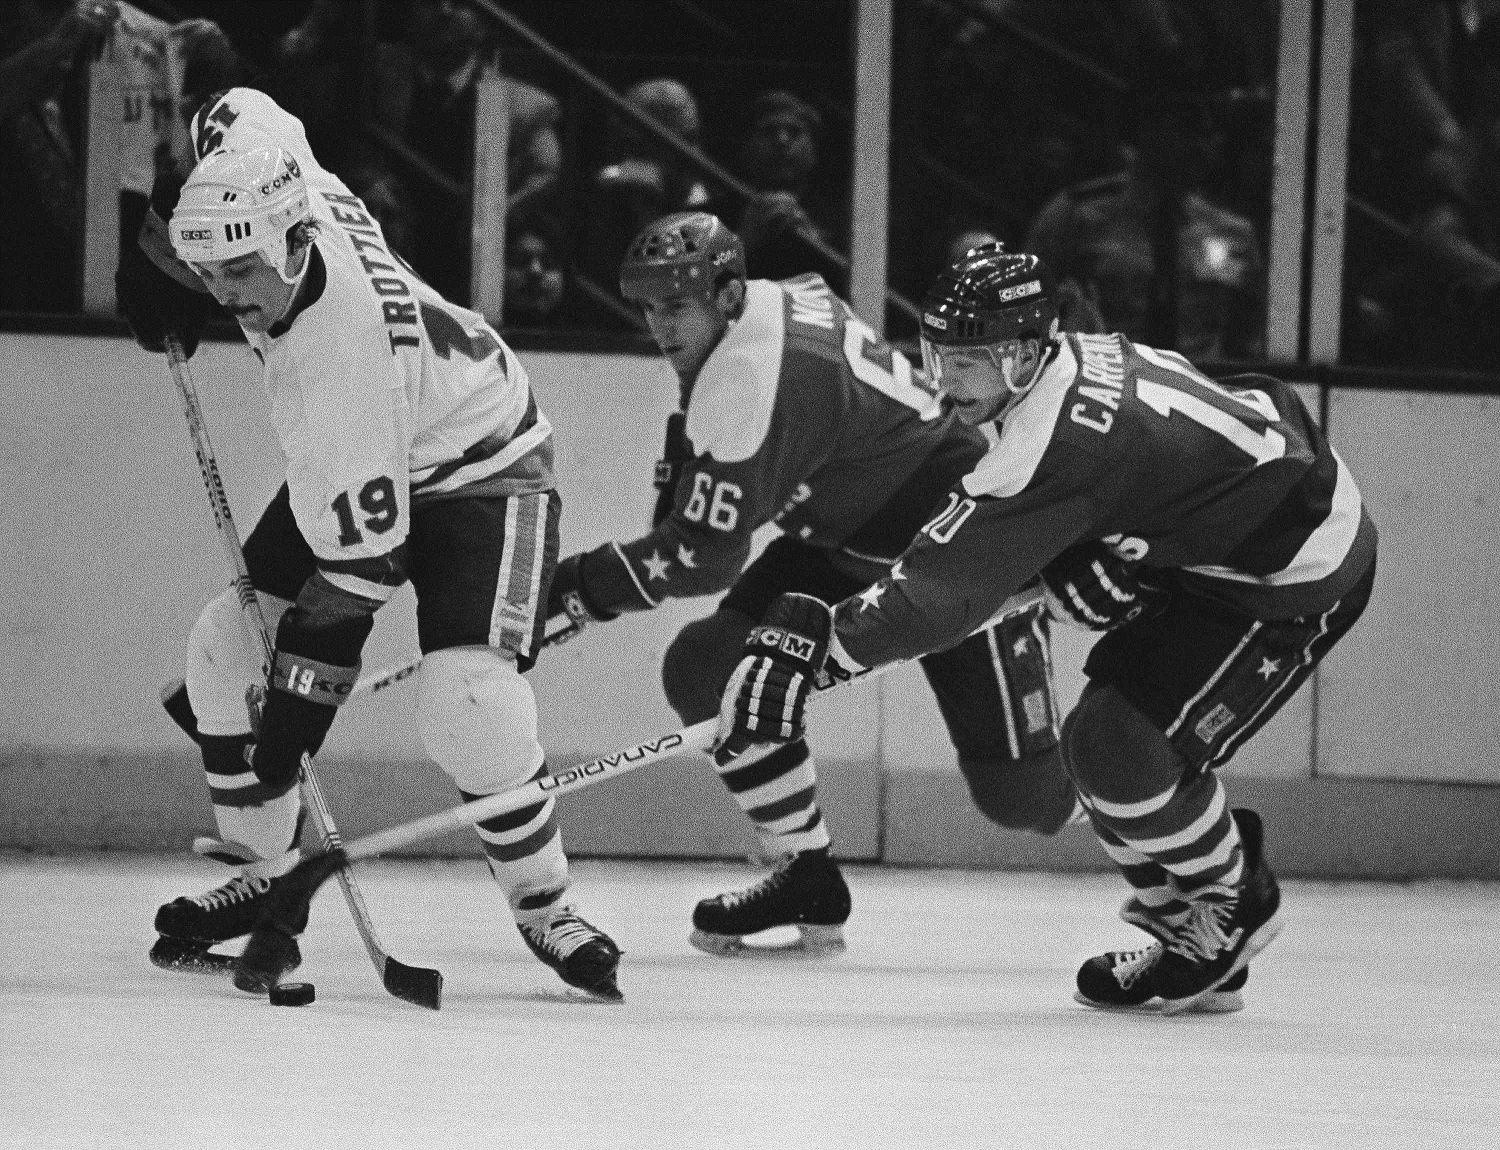 New York Islanders center Bryan Trottier, left, directs the puck against pursuing Washington Capitals in Uniondale, New York, April 7, 1983. Hot on Trottier's heels are Caps Milan Novy, center, and Bob Carpenter in the third period at Nassau Coliseum. Isles beat the Caps 5-2 with Trottier scoring two for the Isles. (AP Photo/Richard Drew)